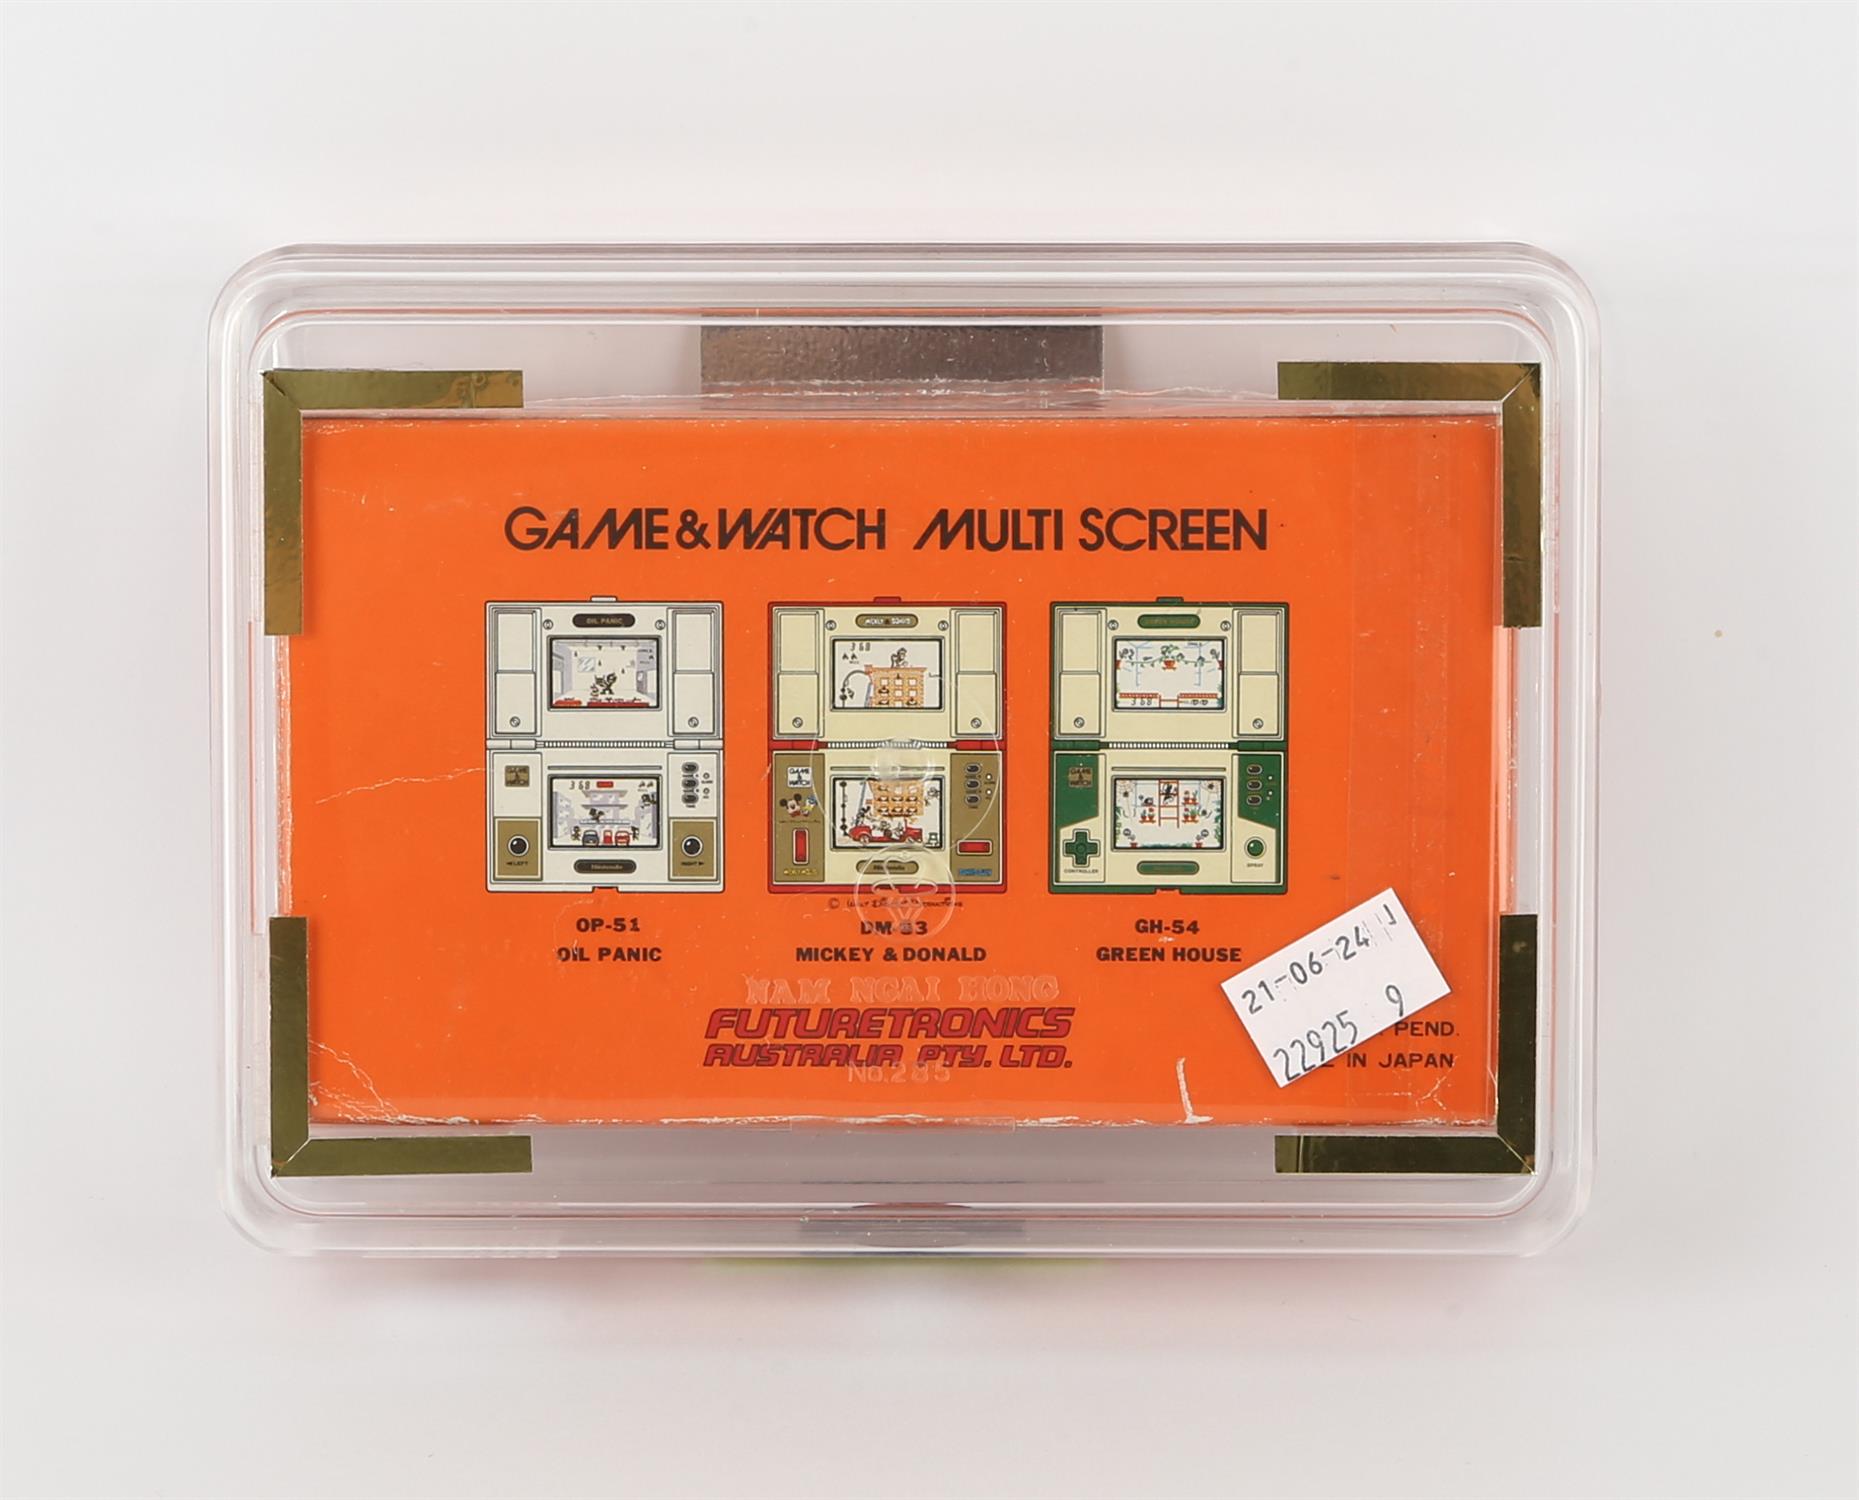 Nintendo Game & Watch Donkey Kong [DK-52] handheld console from 1982 (complete, boxed and in a - Bild 2 aus 13